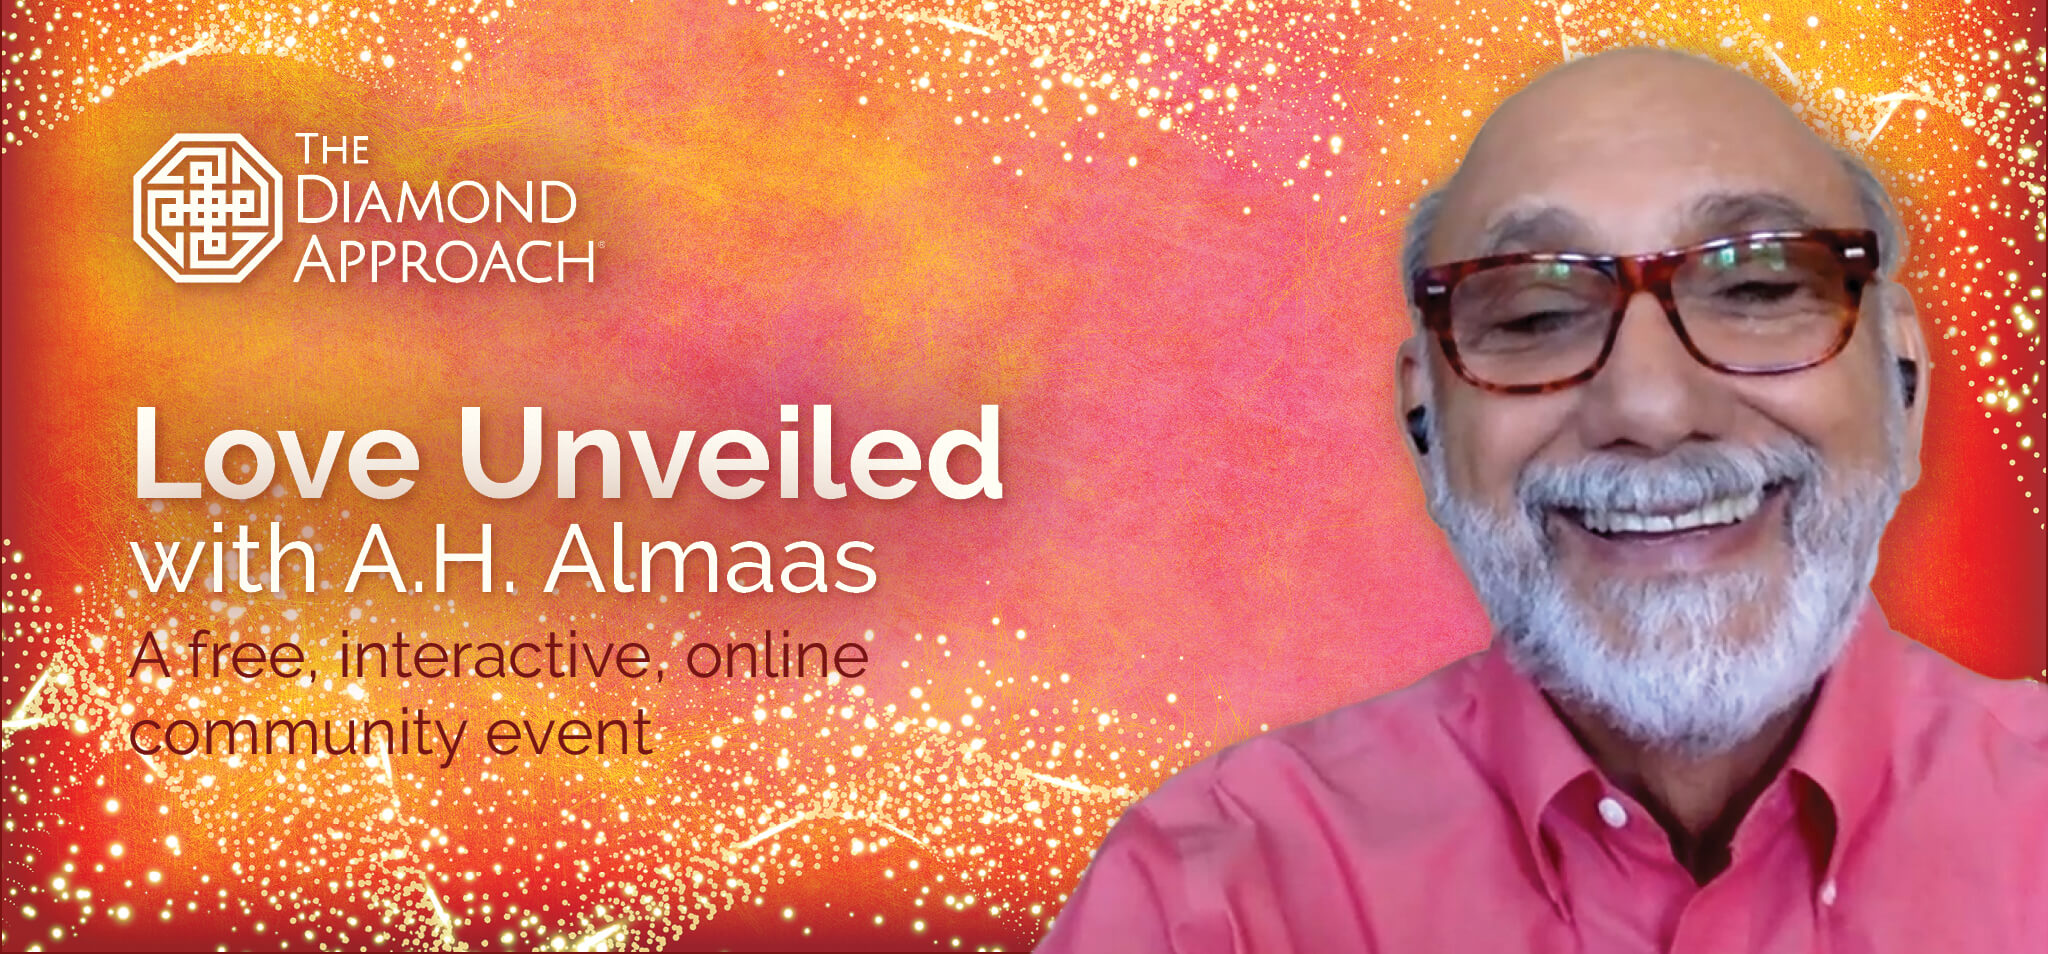 Love Unveiled with A.H. Almaas